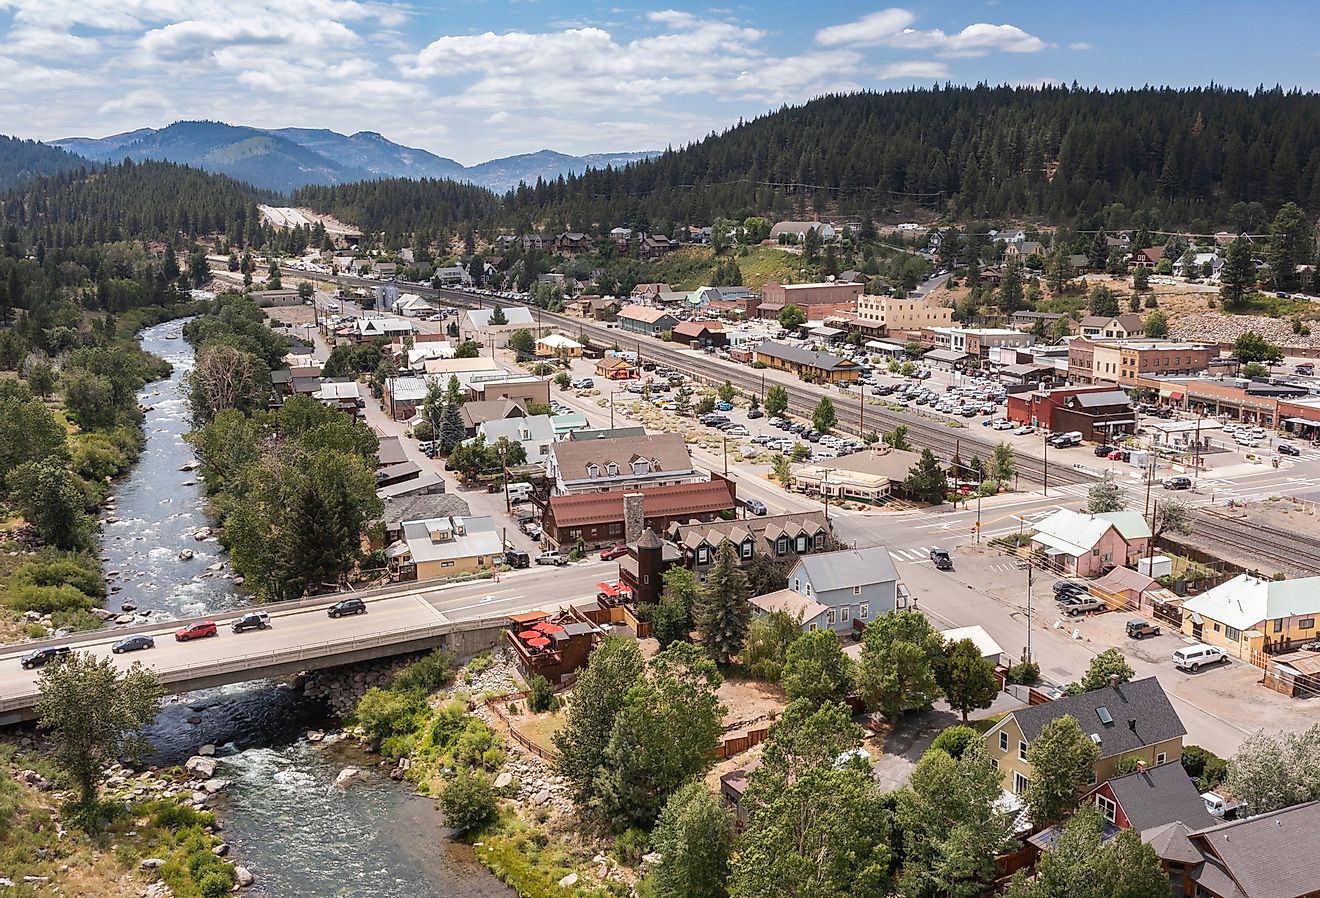 Afternoon sun shines on the historic river town of Truckee, California. Image credit Matt Gush via Shutterstock